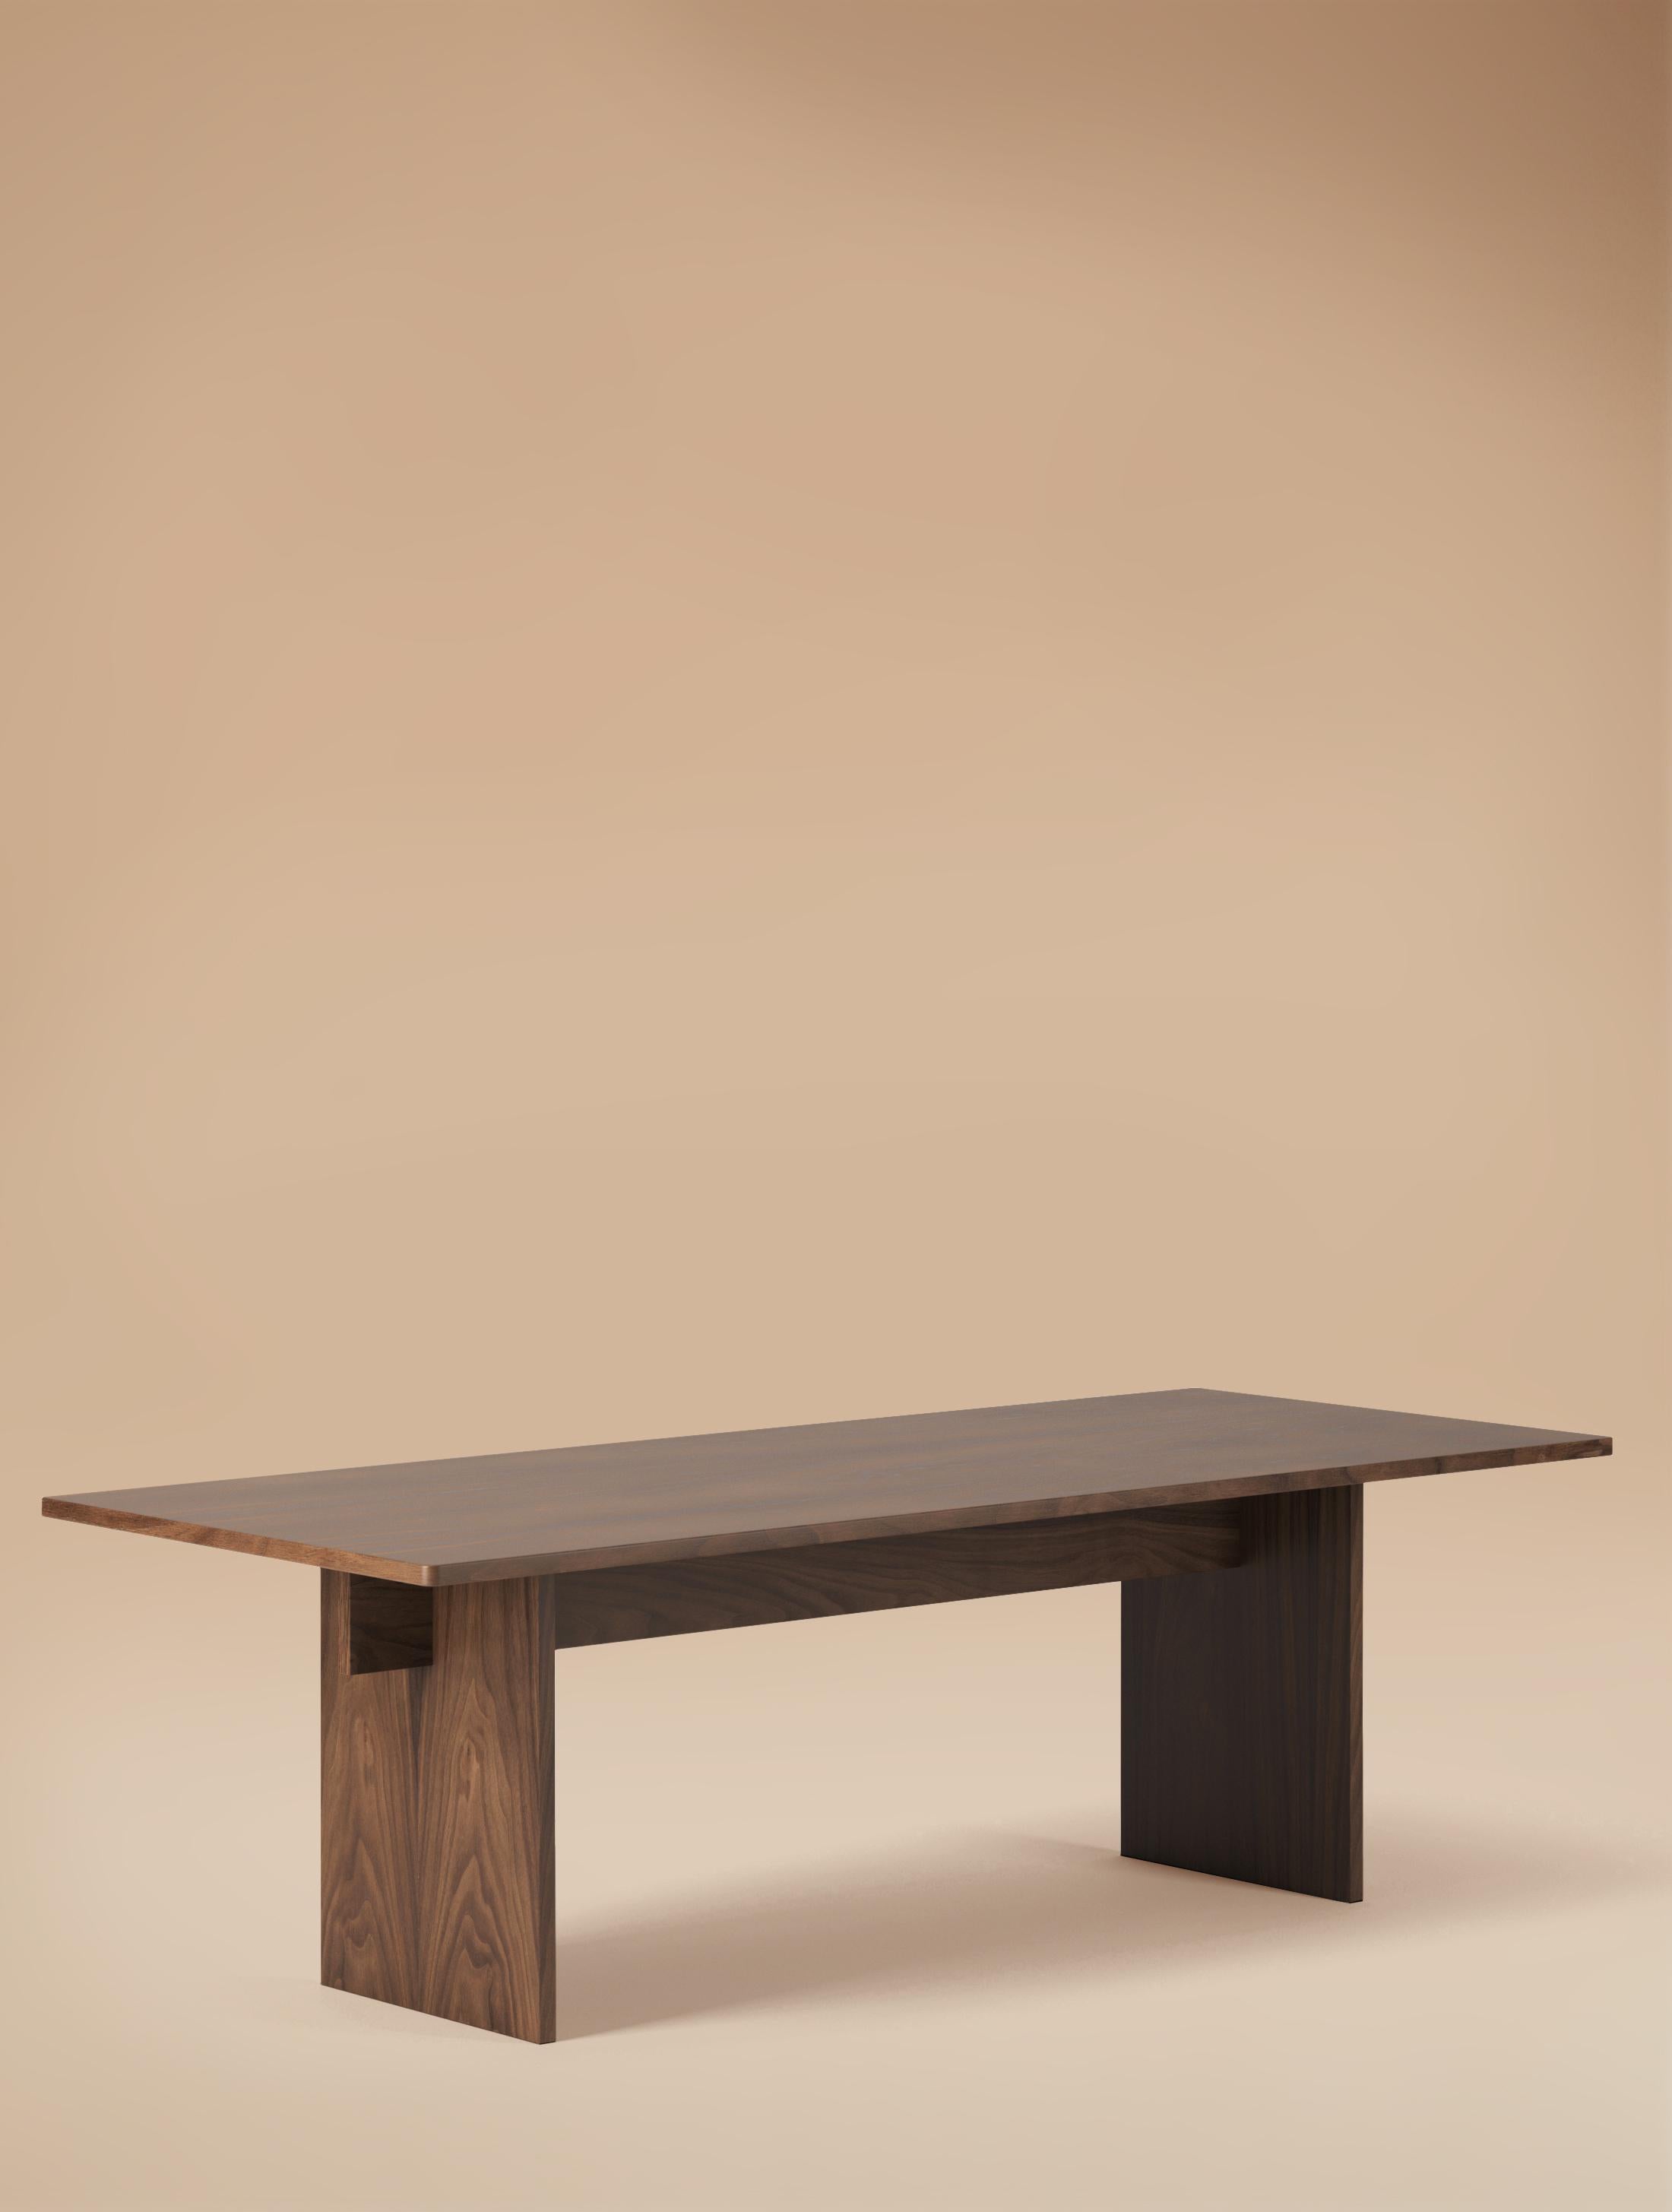 6 Seater Faure Table Handcrafted in Oak by Kevin Frankental 7